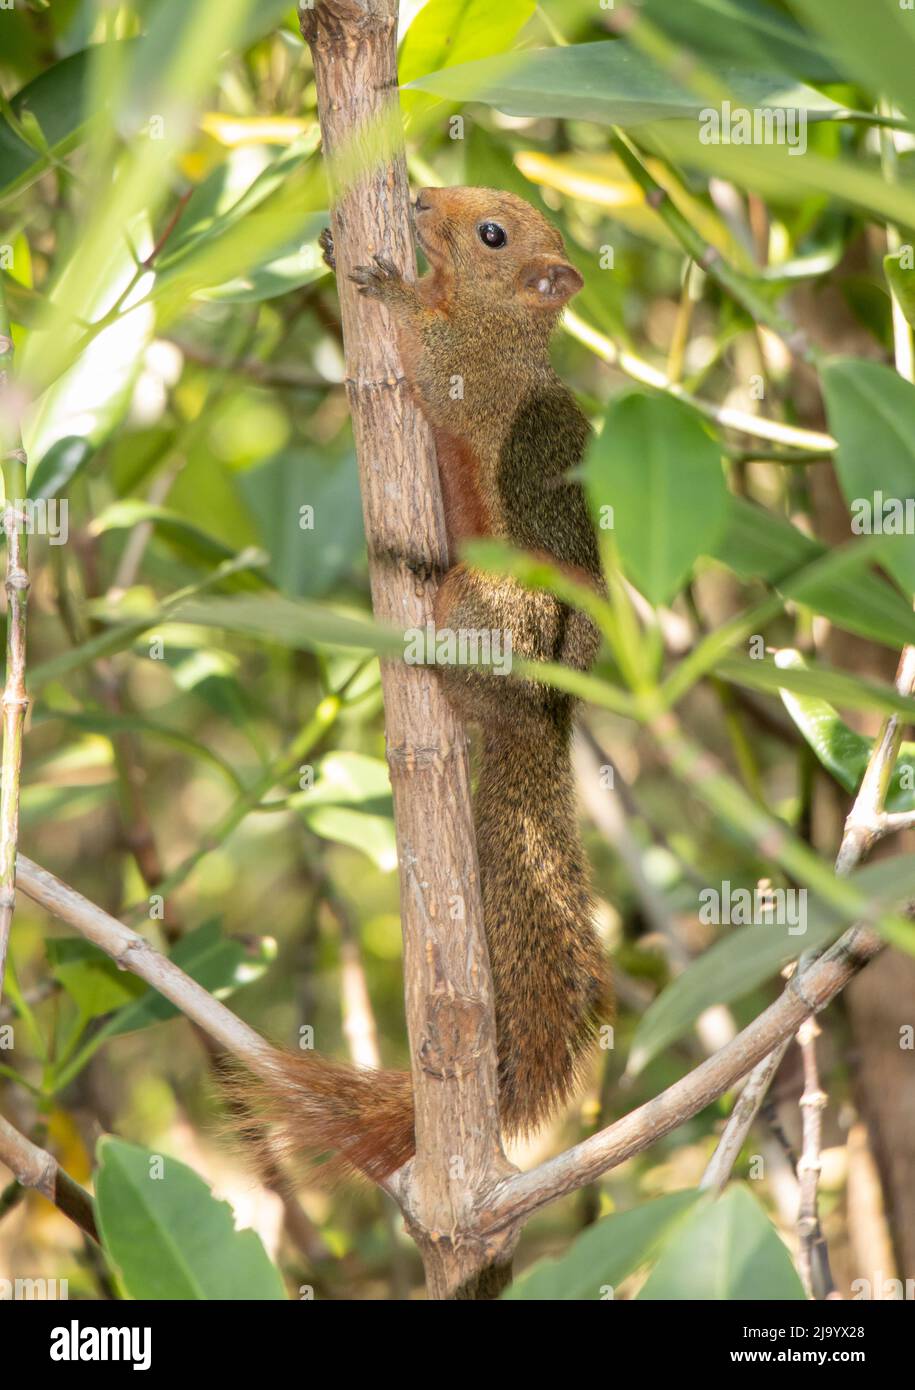 The red-bellied tree squirrel climbs on the tree. Pallas's squirrel (Callosciurus erythraeus) in a tropical nature, Thailand. Stock Photo